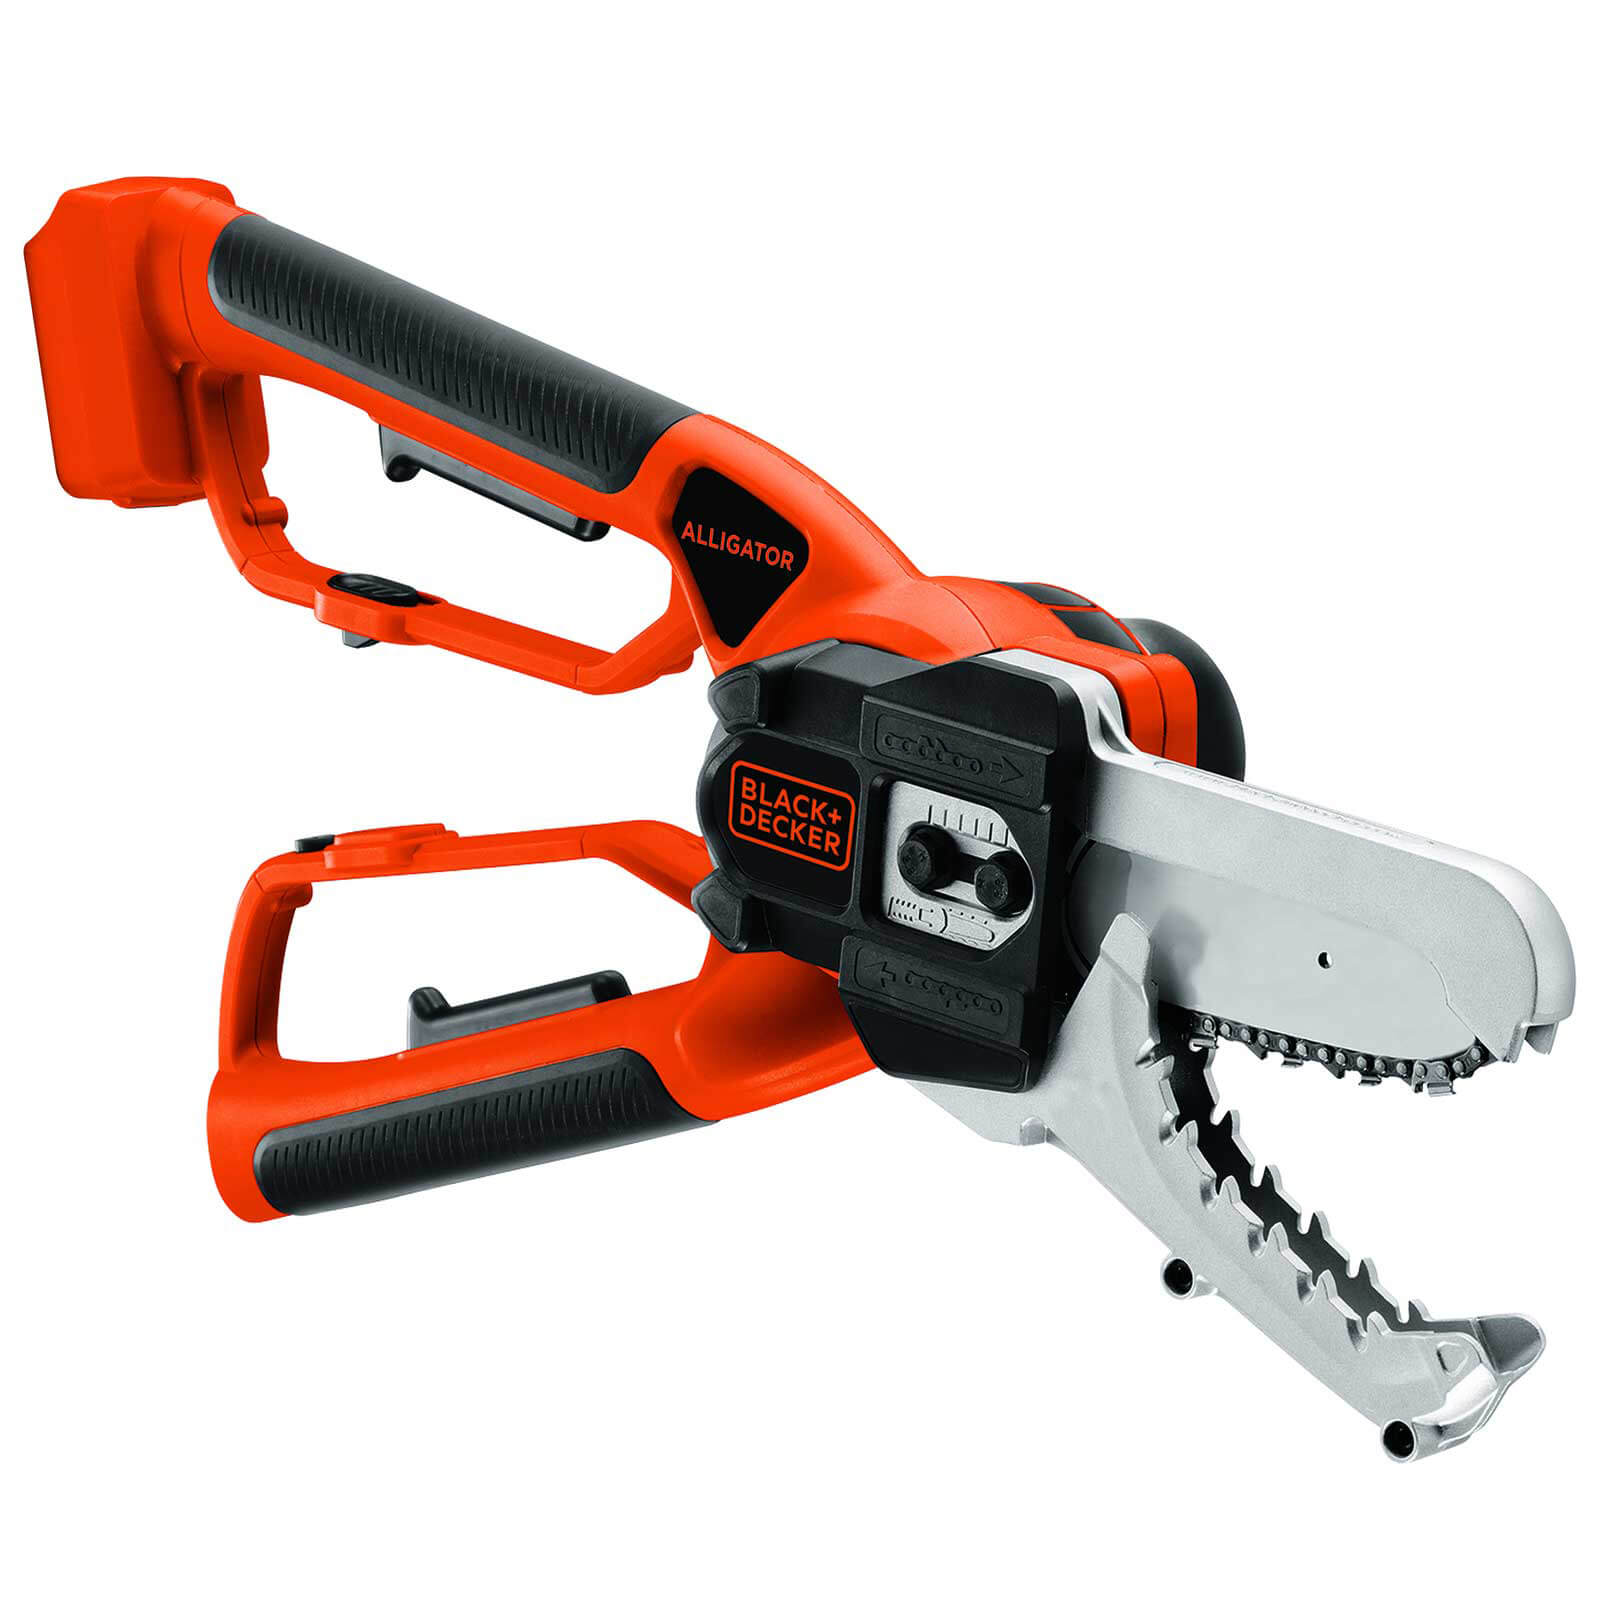 Image of Black and Decker GKC1000 18v Cordless Alligator Powered Lopper No Batteries No Charger